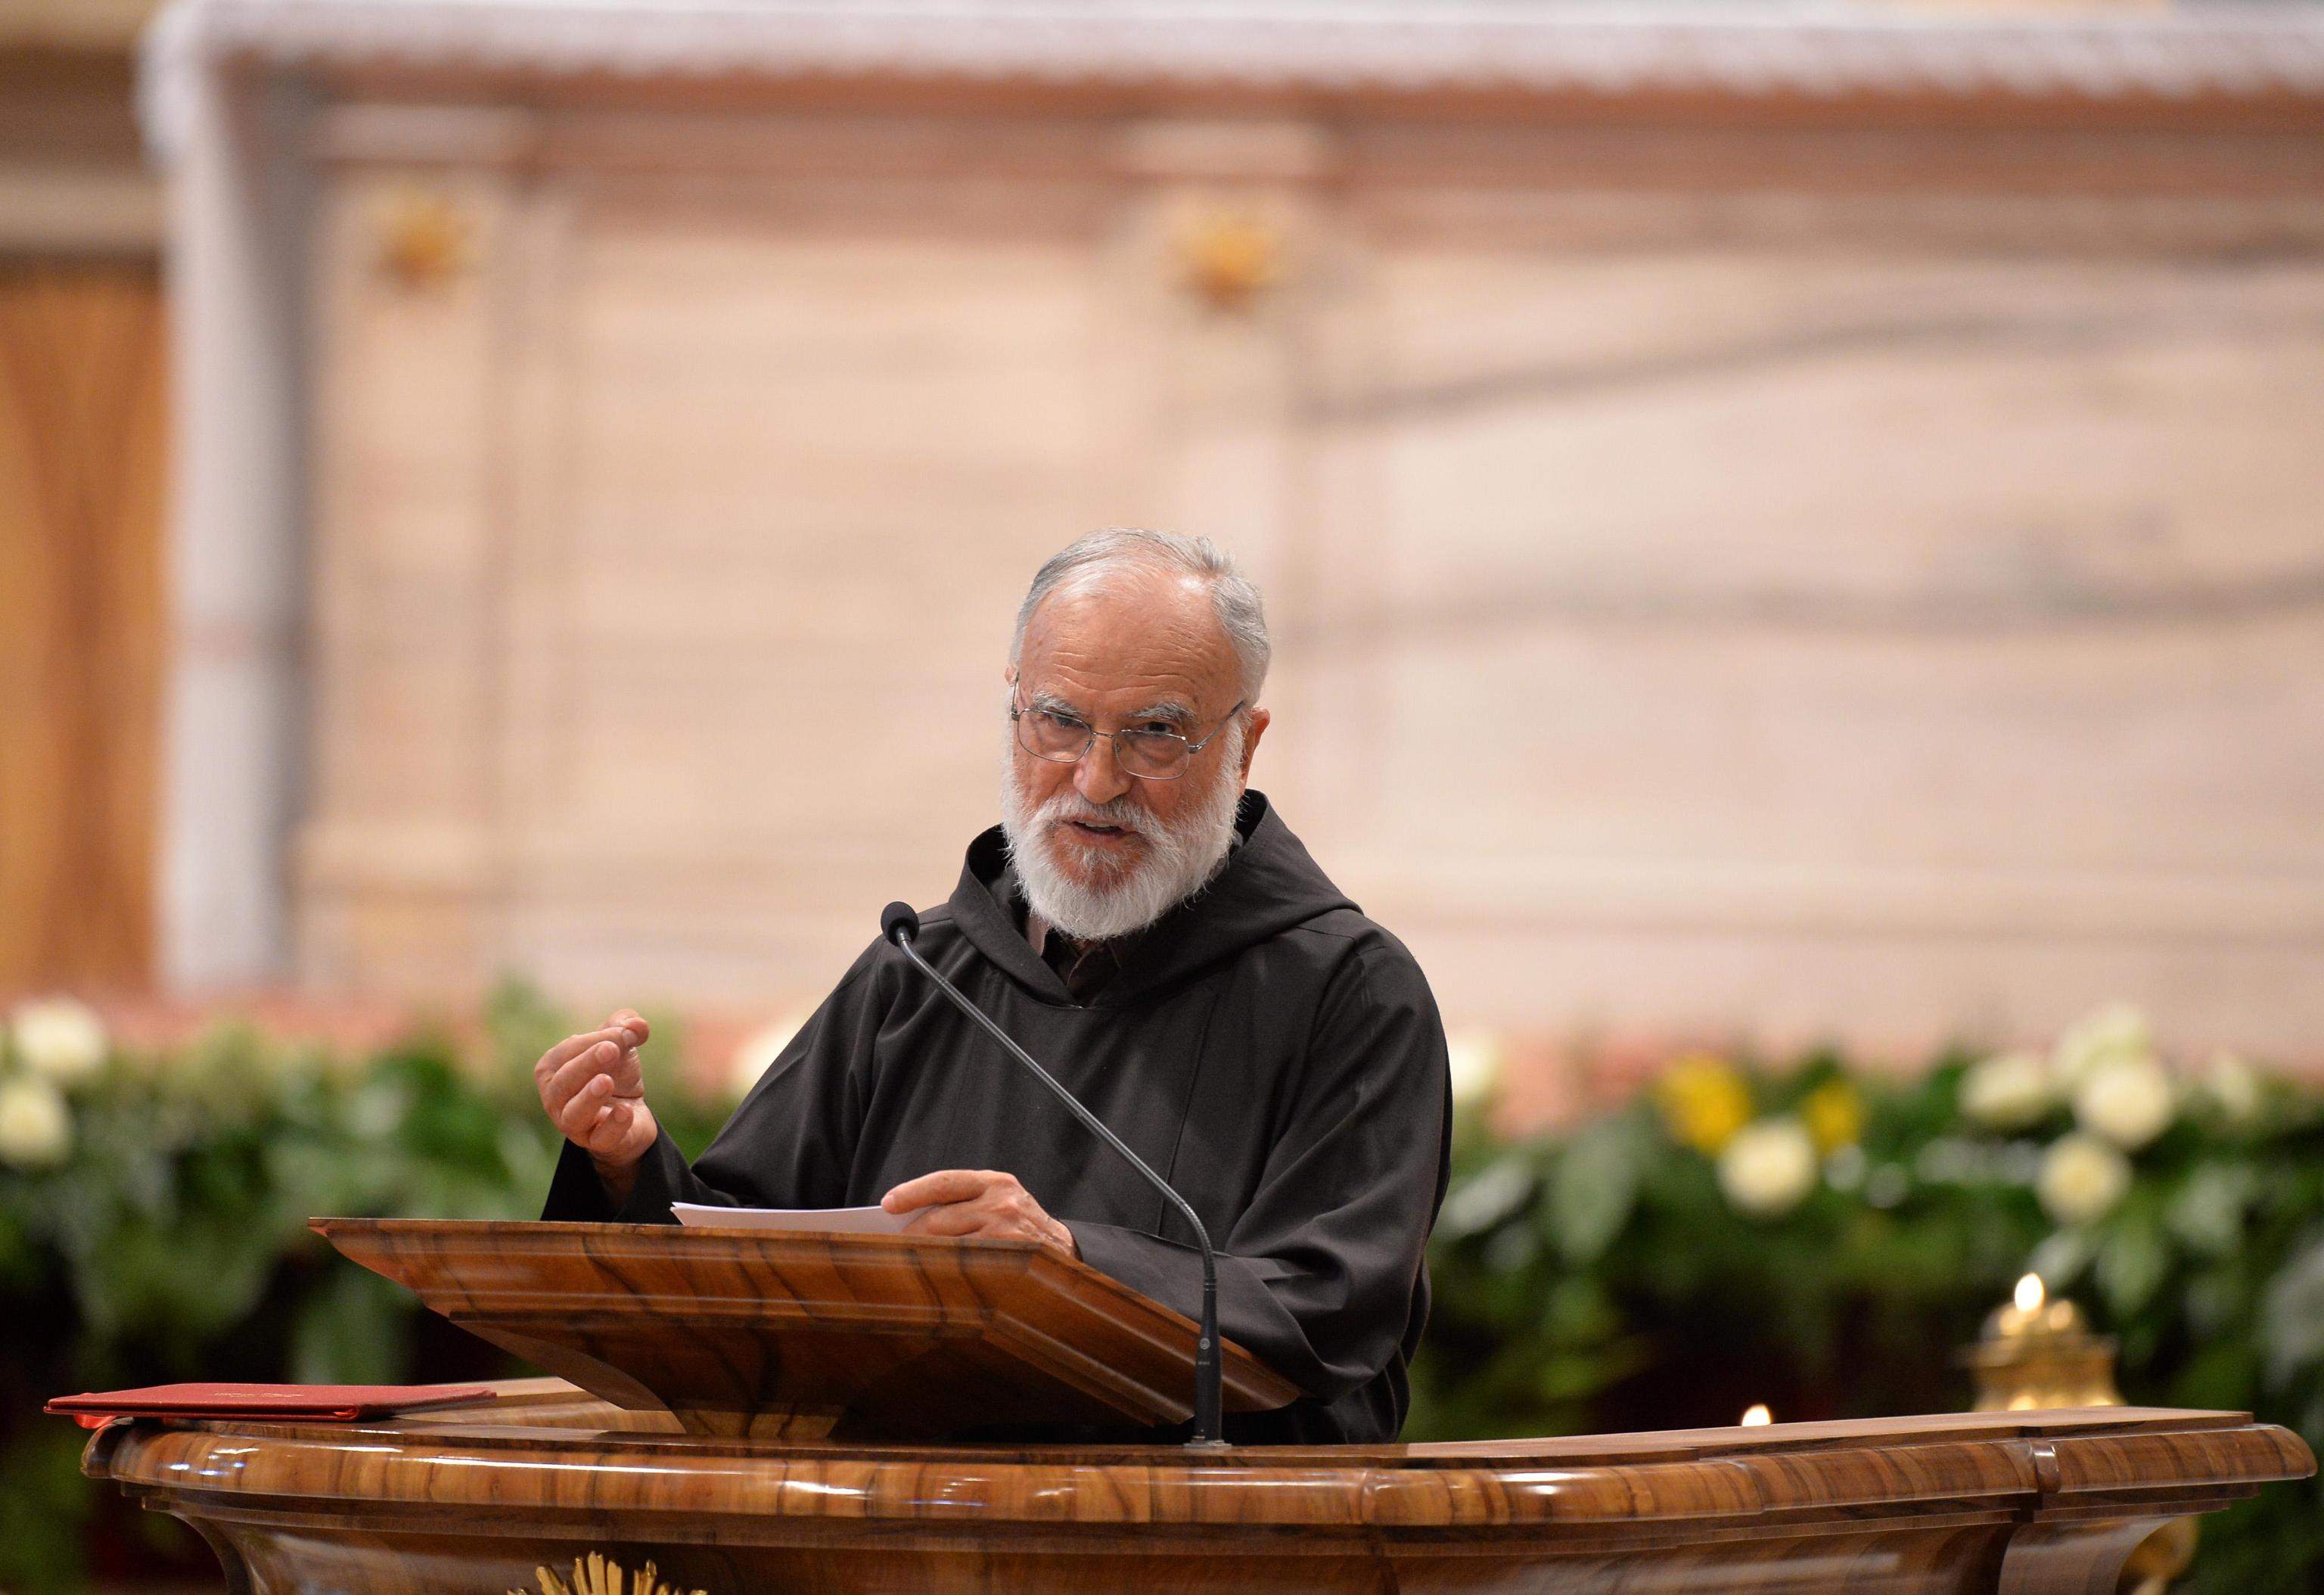 Fr. Raniero Cantalamessa OFMCap during his homily in St. Peter's